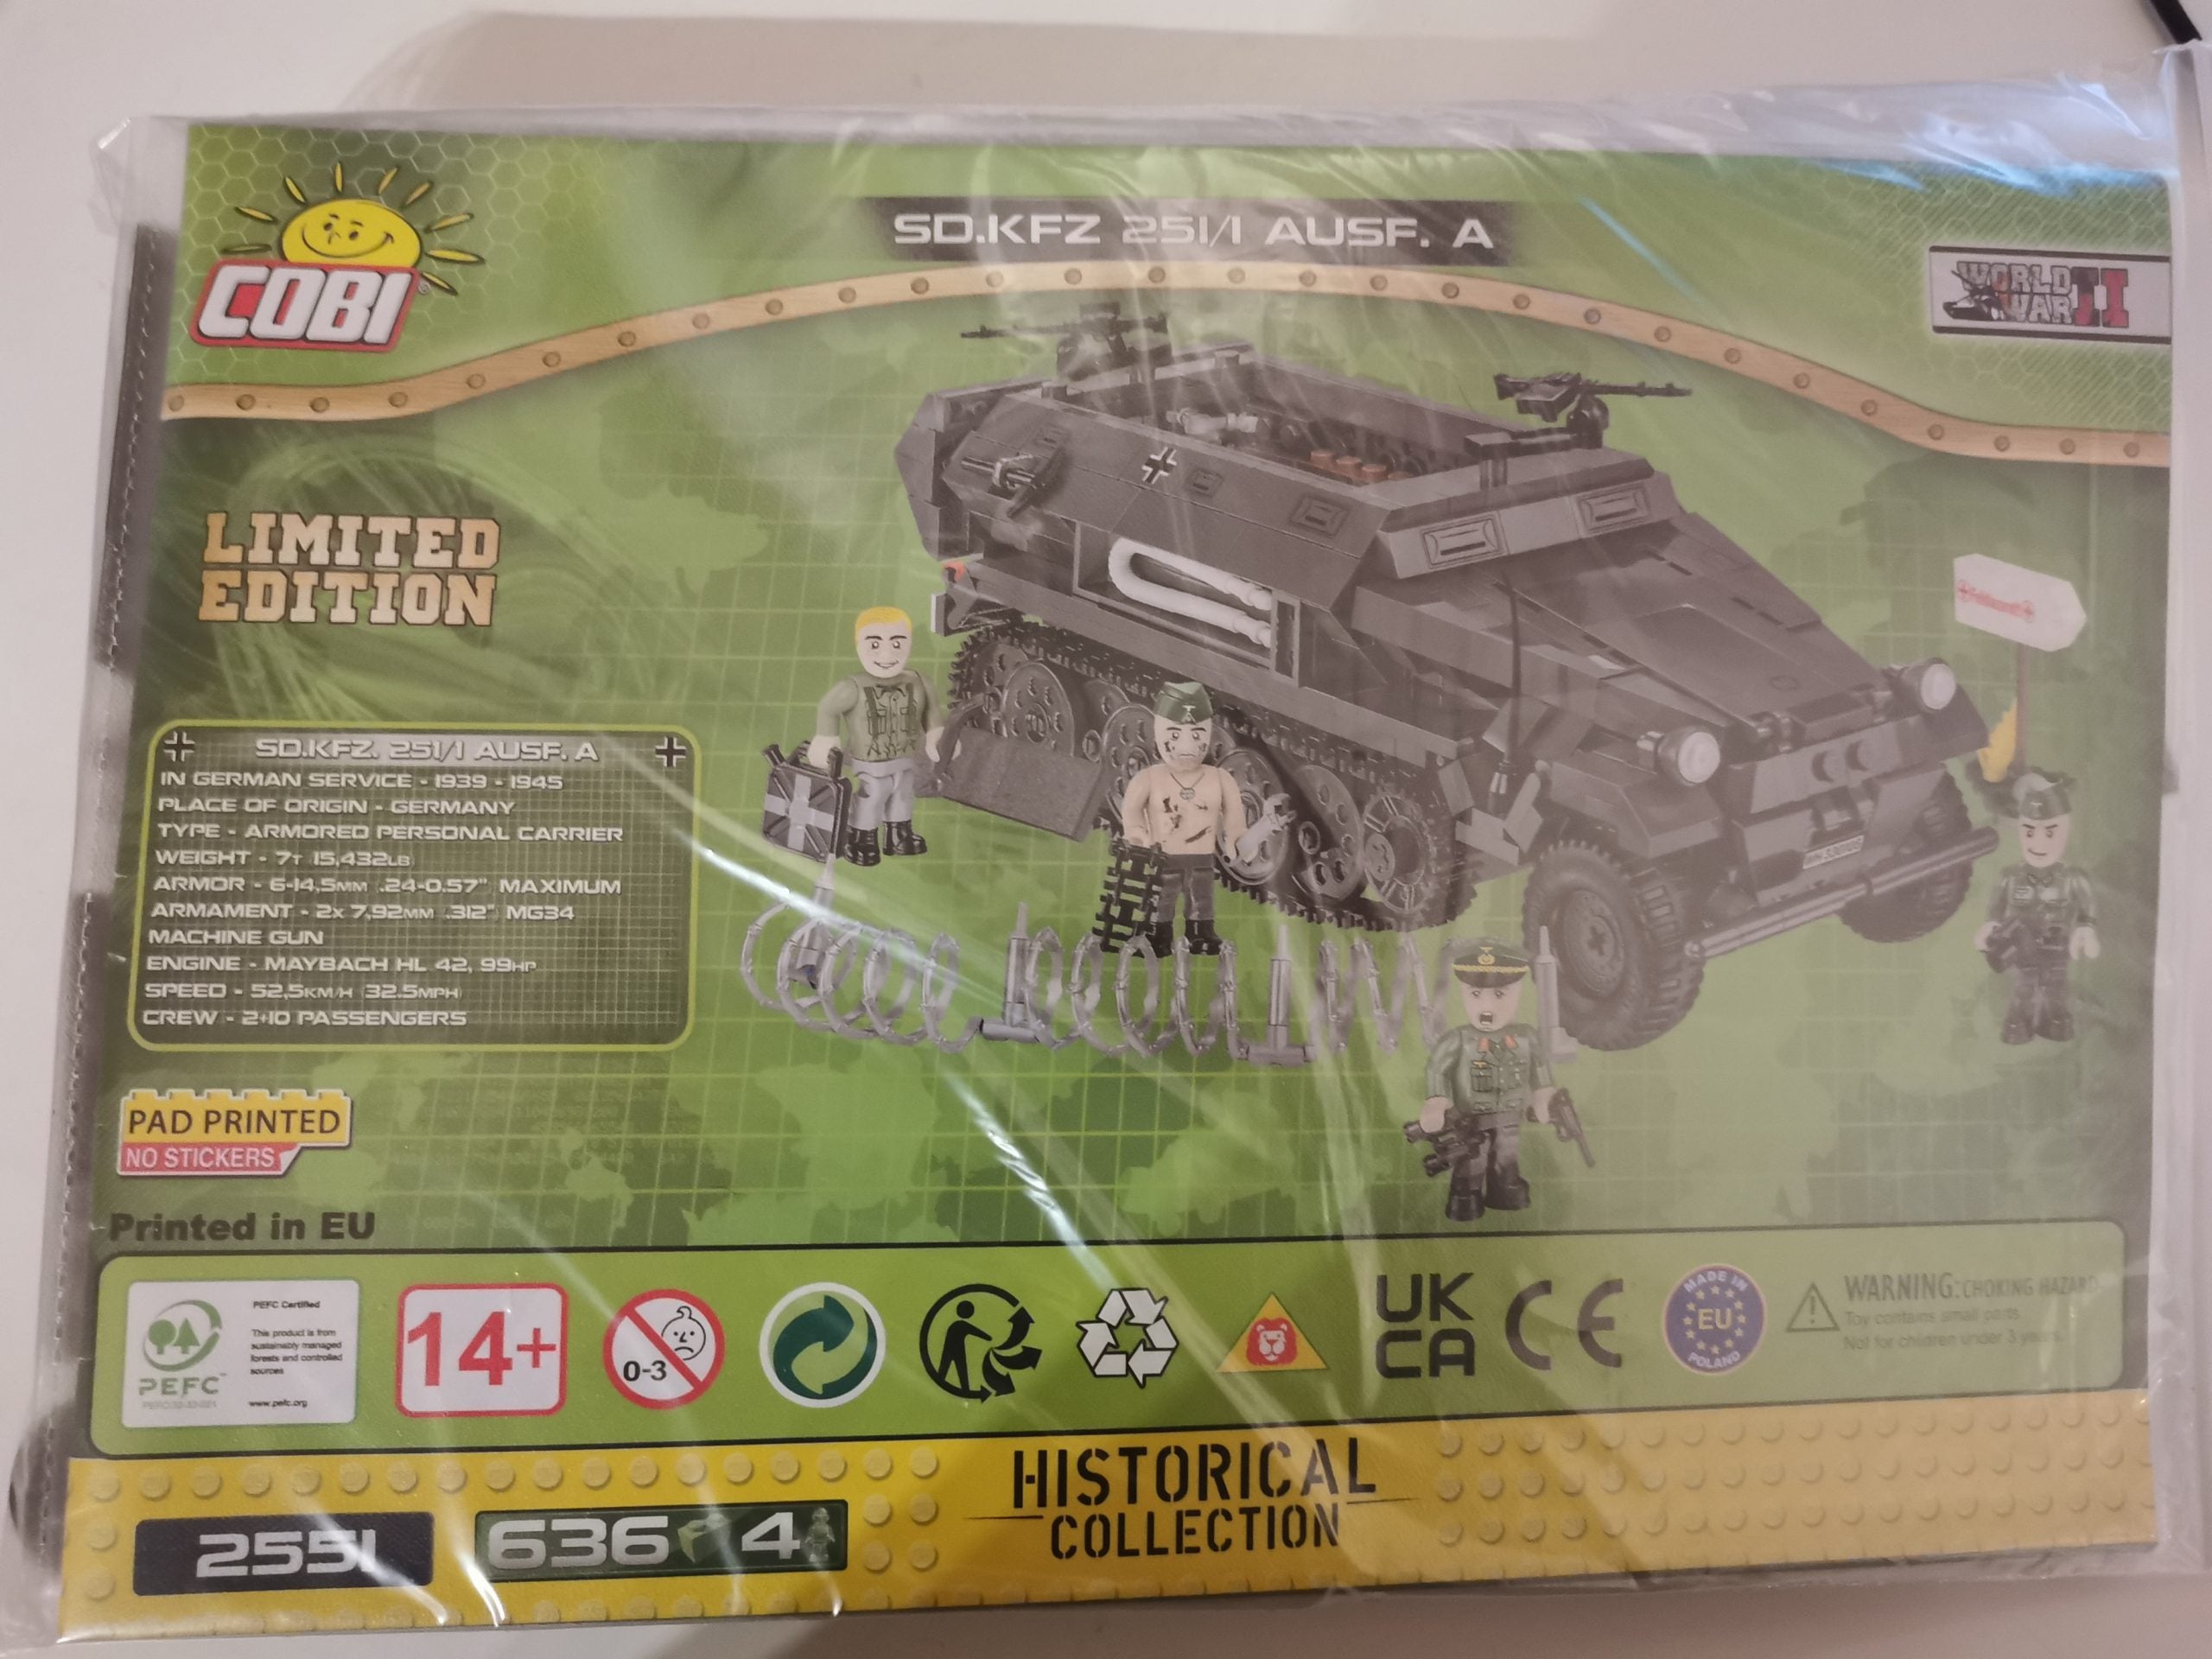 Cobi 2551 Sd.Kfz. 251/1 Ausf. A - Limited Edition used